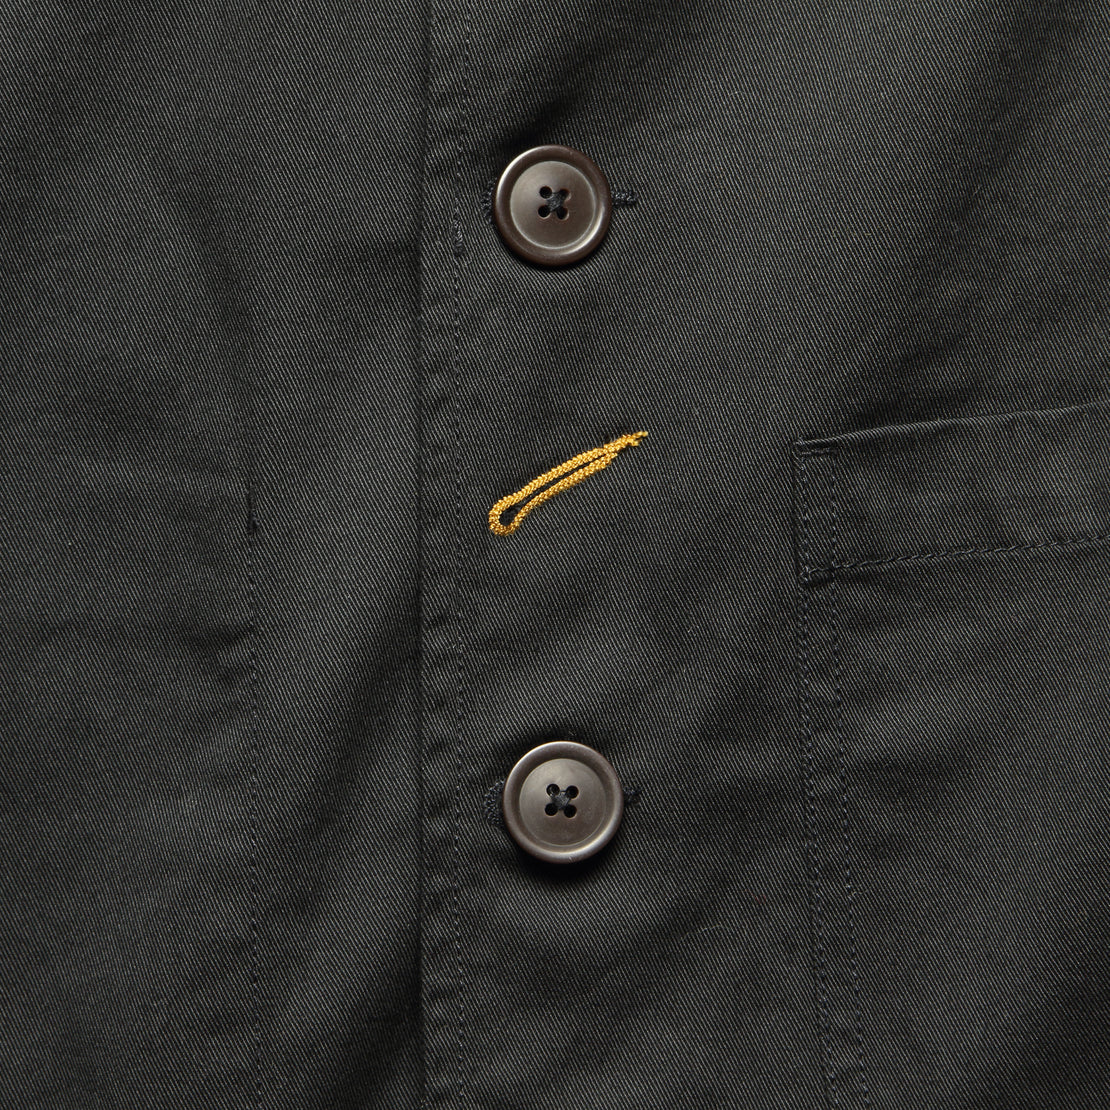 Twill Bakers Jacket - Black - Universal Works - STAG Provisions - Outerwear - Shirt Jacket